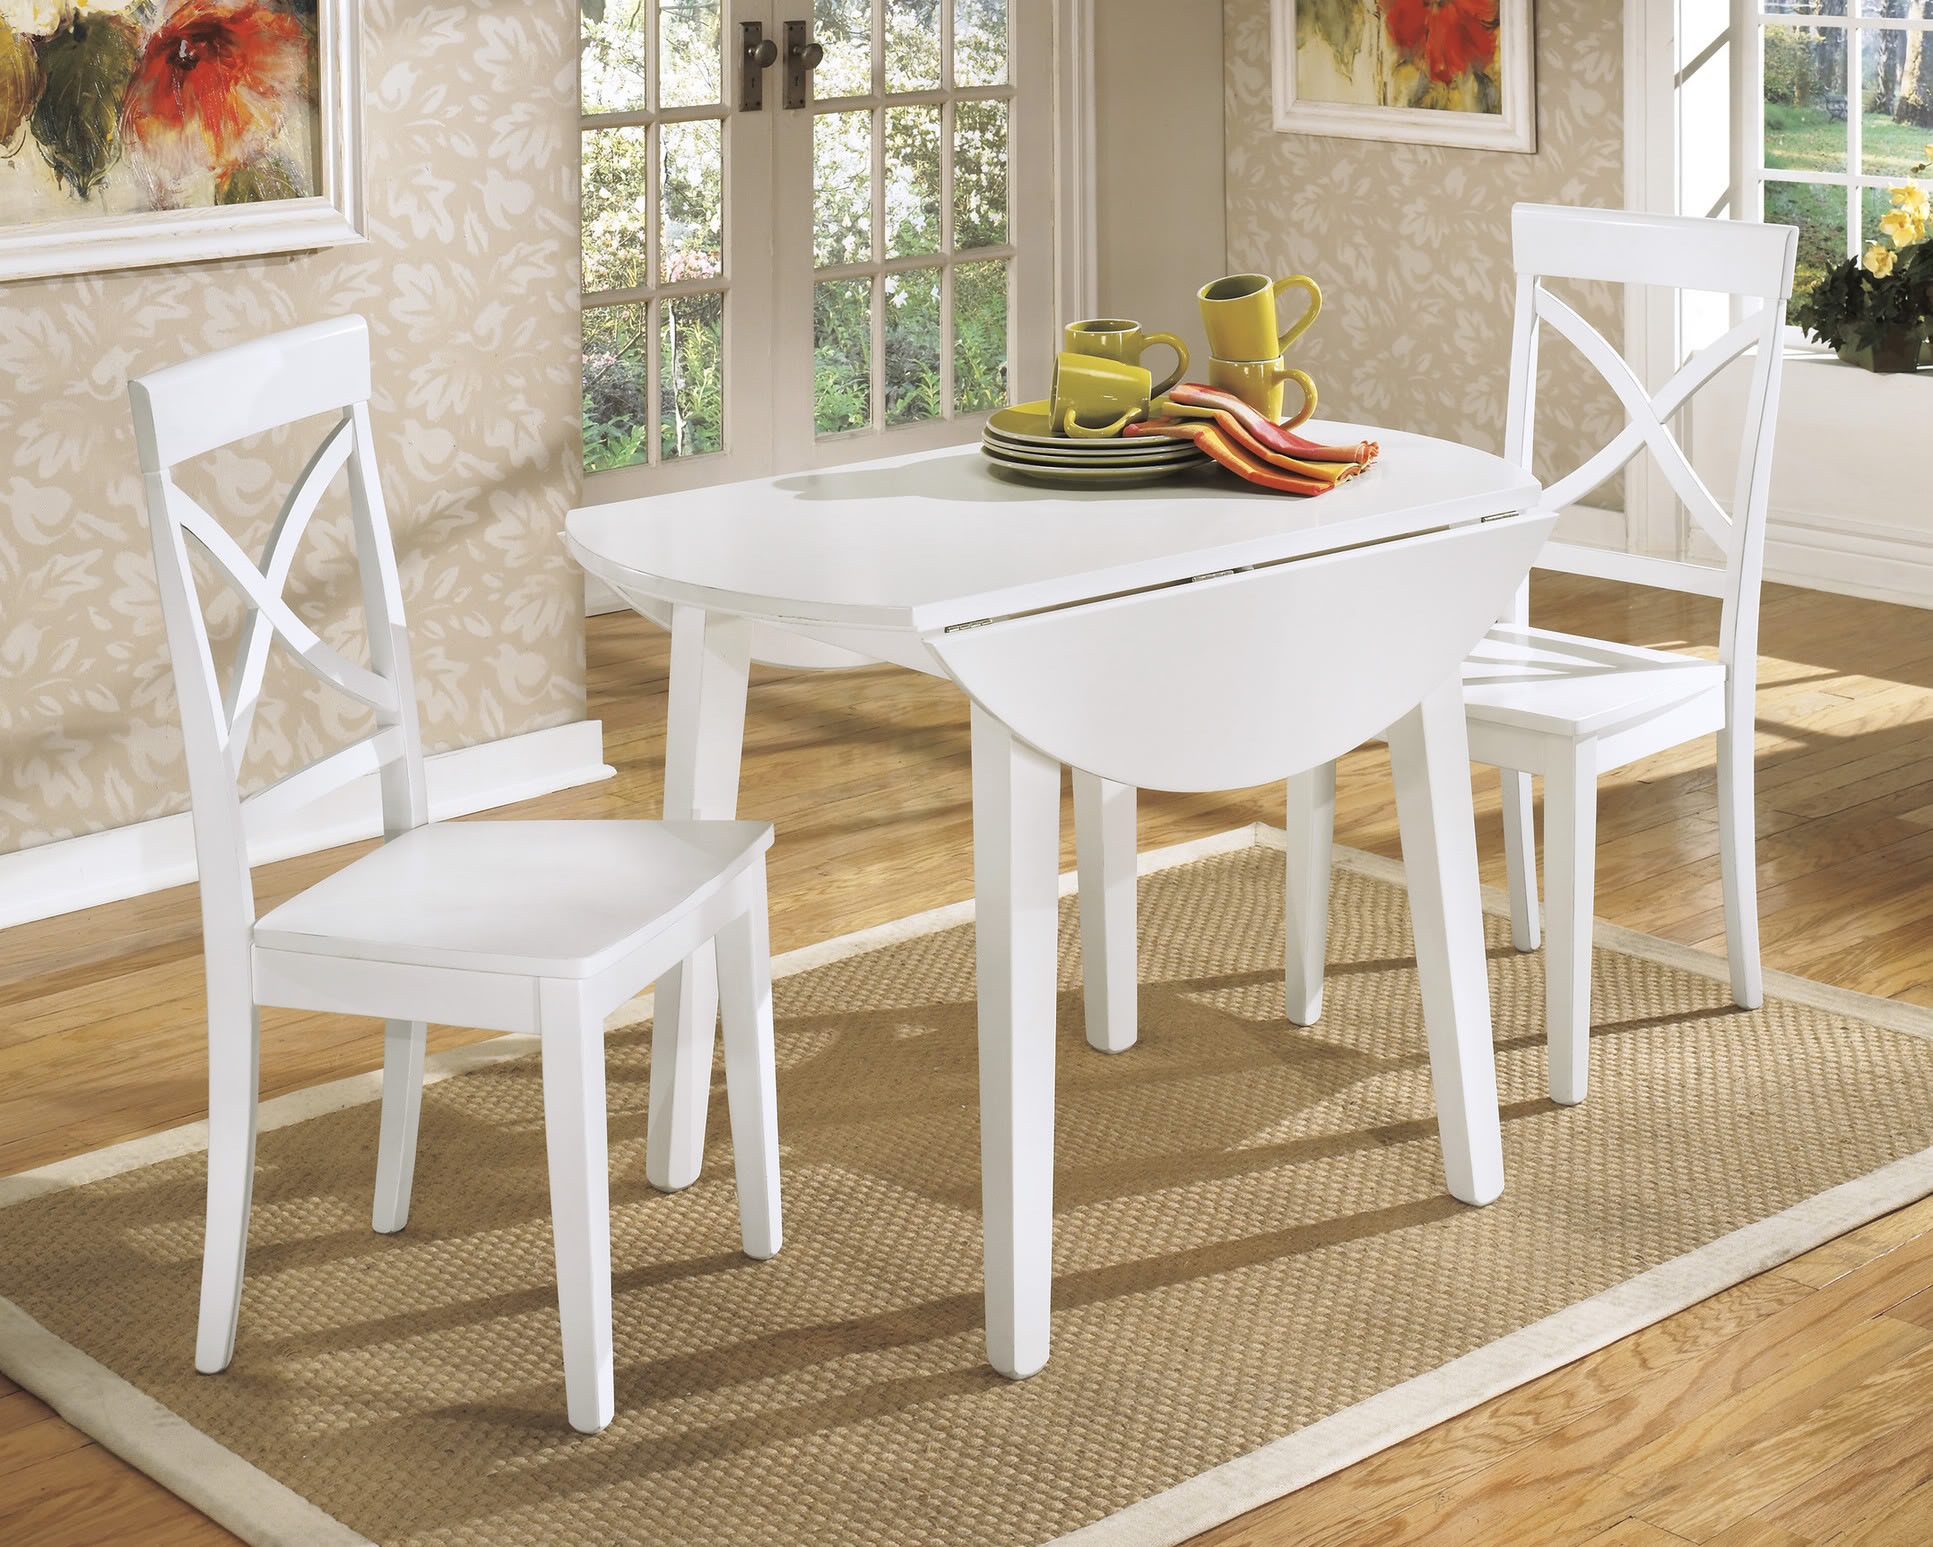 Kitchen Table Sets White
 White Round Kitchen Table and Chairs Design